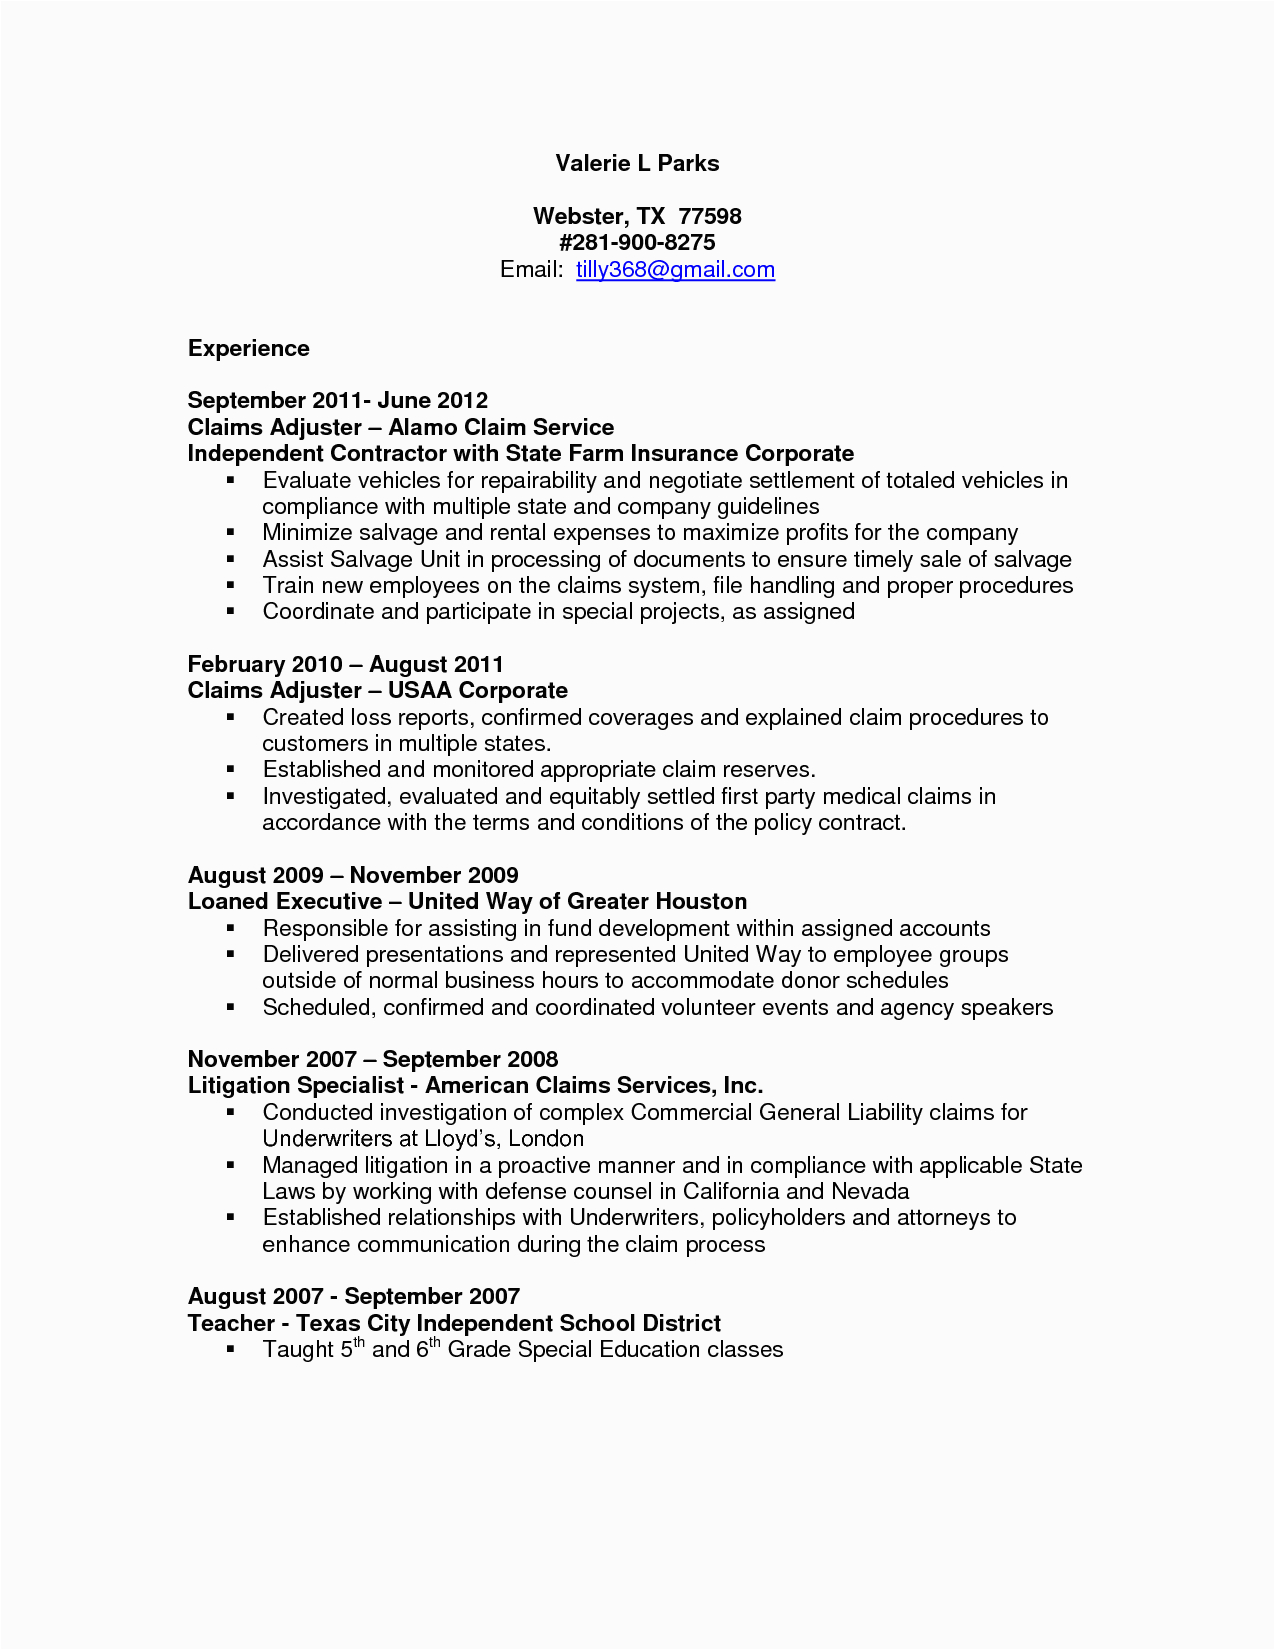 Sample Resume for Entry Level Claims Adjuster Claims Adjuster Resume Sample